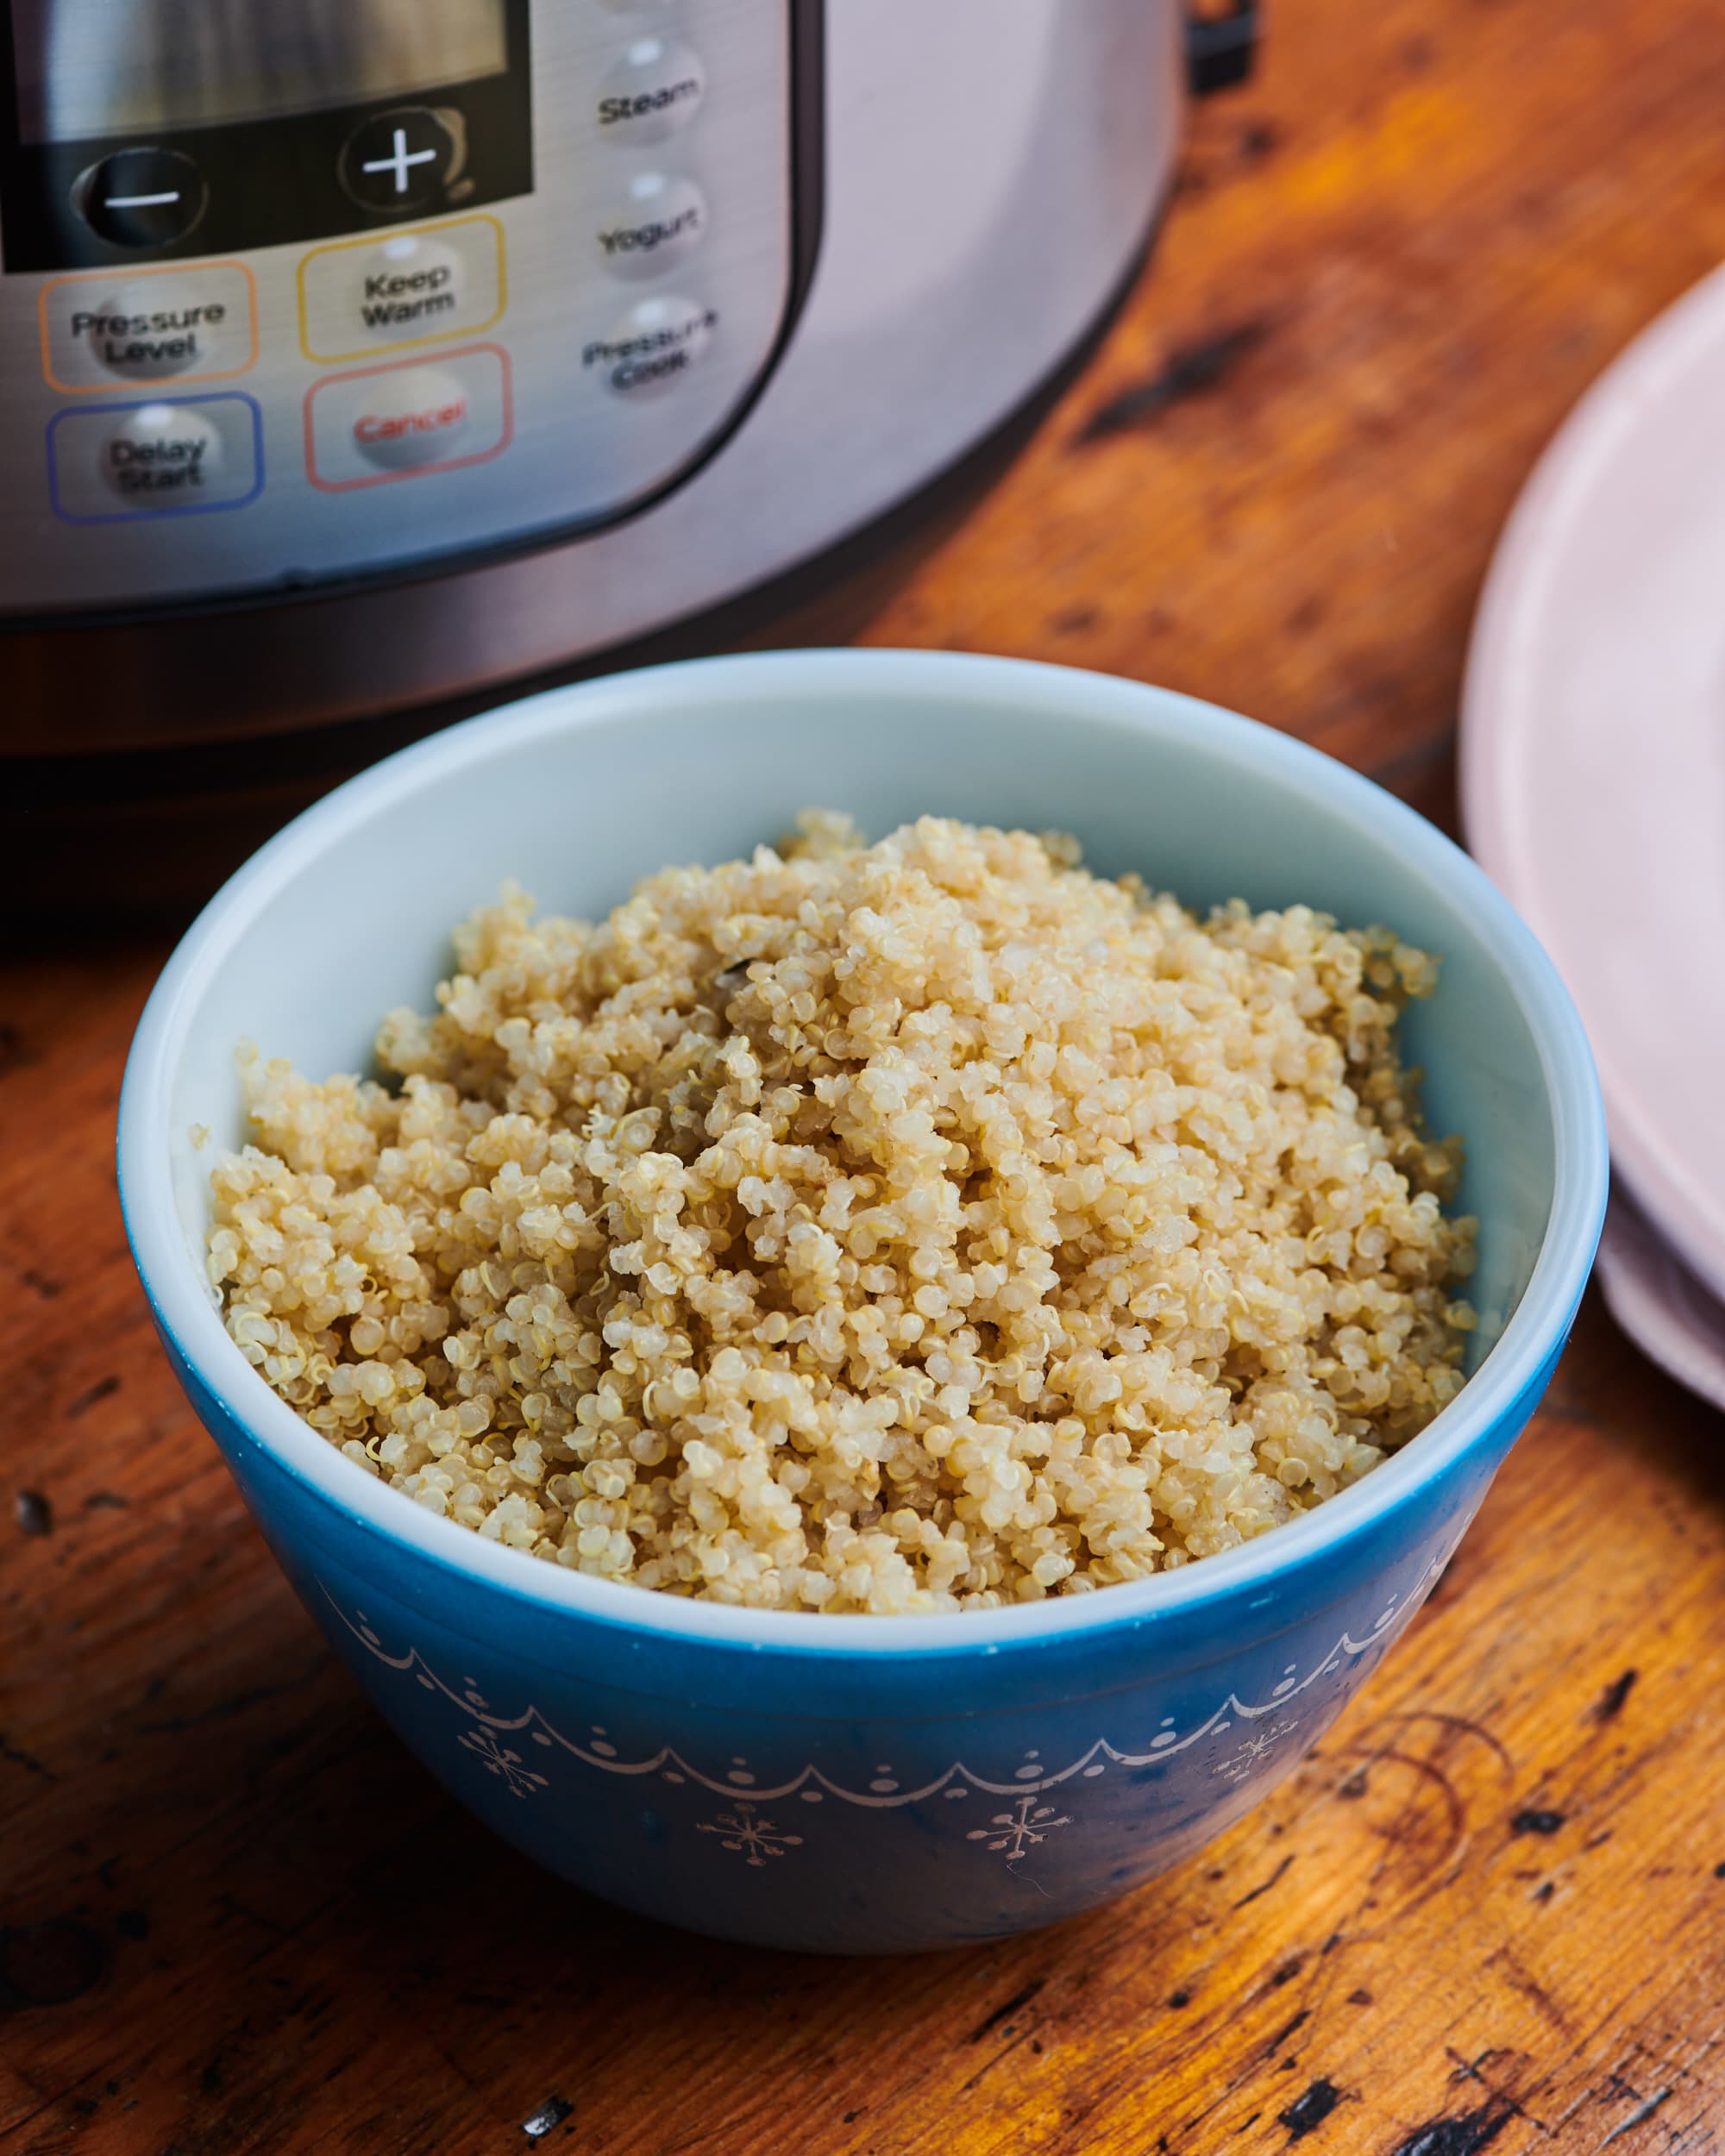 https://cdn.apartmenttherapy.info/image/upload/v1588366623/k/Photo/Recipes/2020-05-how-to-the-perfect-quinoa-in-the-instant-pot/HT-Instant-Pot-Quinoa328.jpg